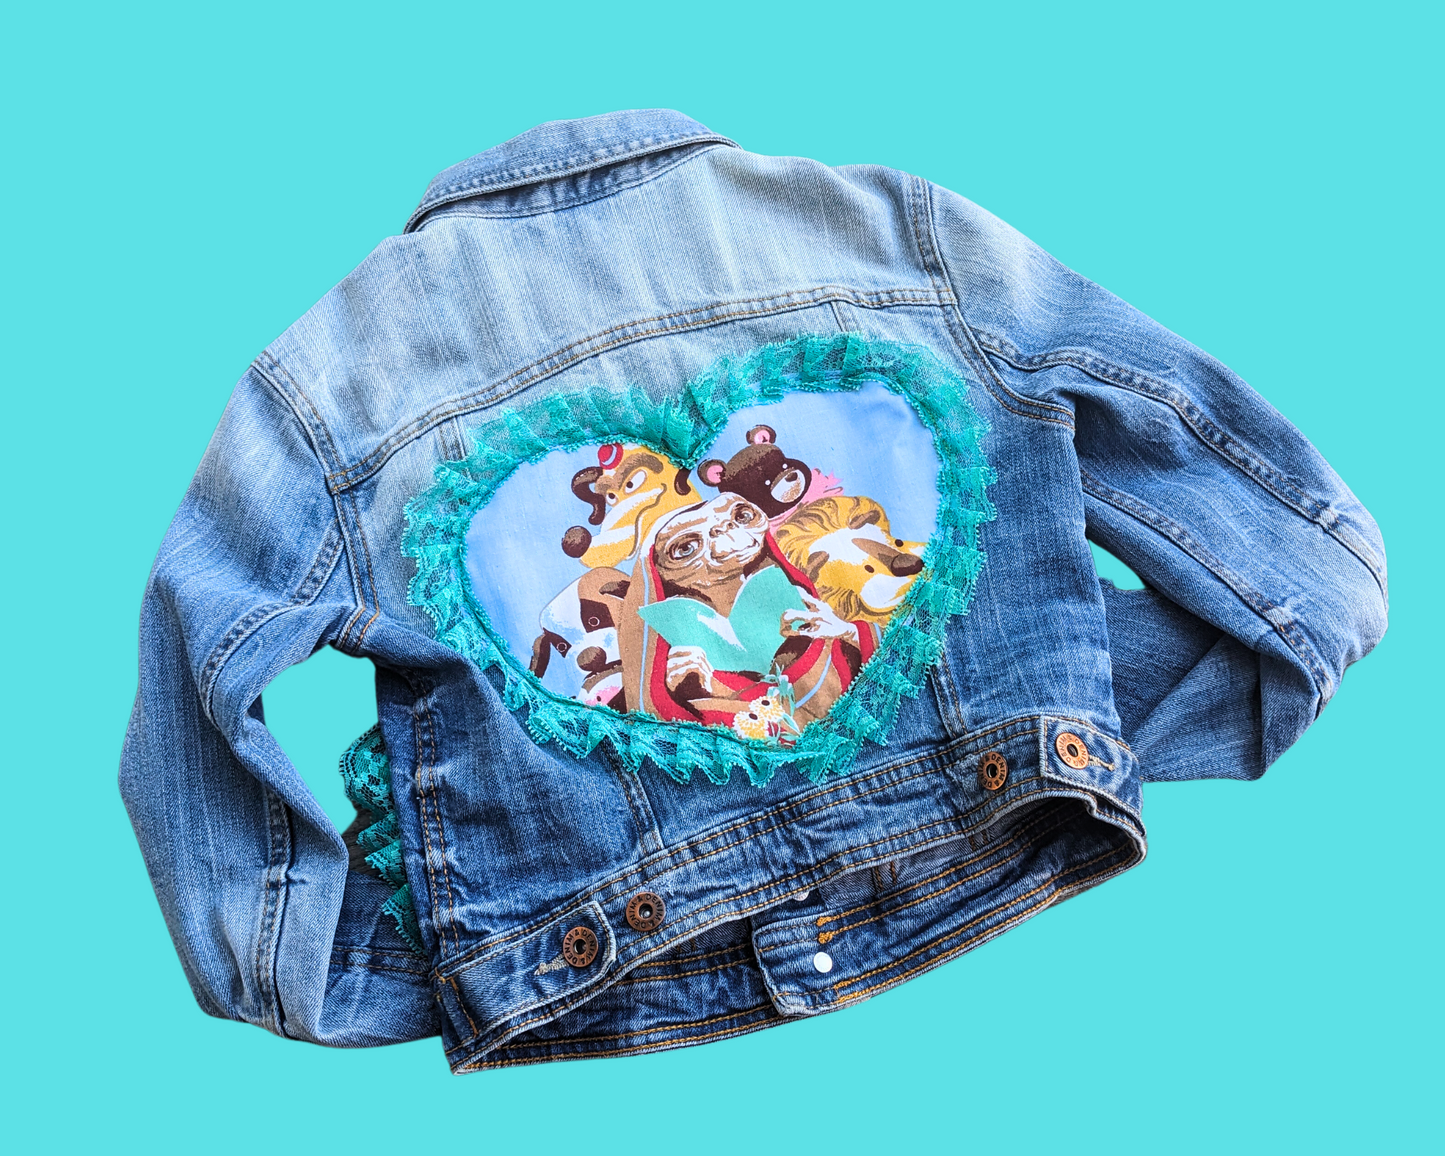 Handmade, Upcycled Denim Jacket Patched Up with Bedsheets Scraps of E.T Size S